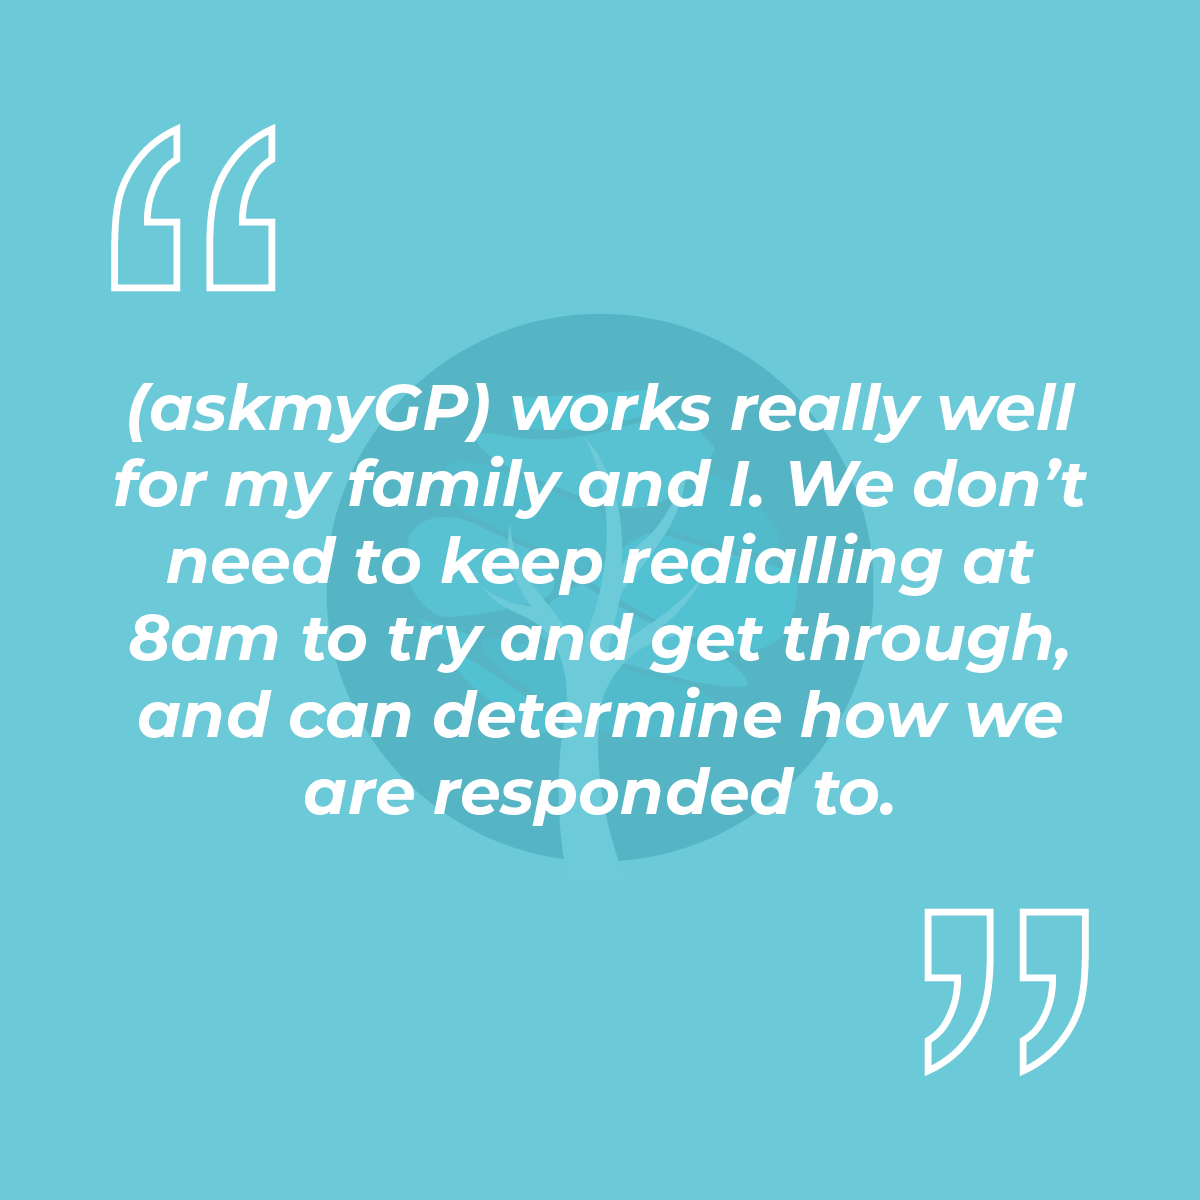 (askmyGP) works really well for my family and I. We don't need to keep redialling at 8am to try and get through, and can determine how we are responded to.